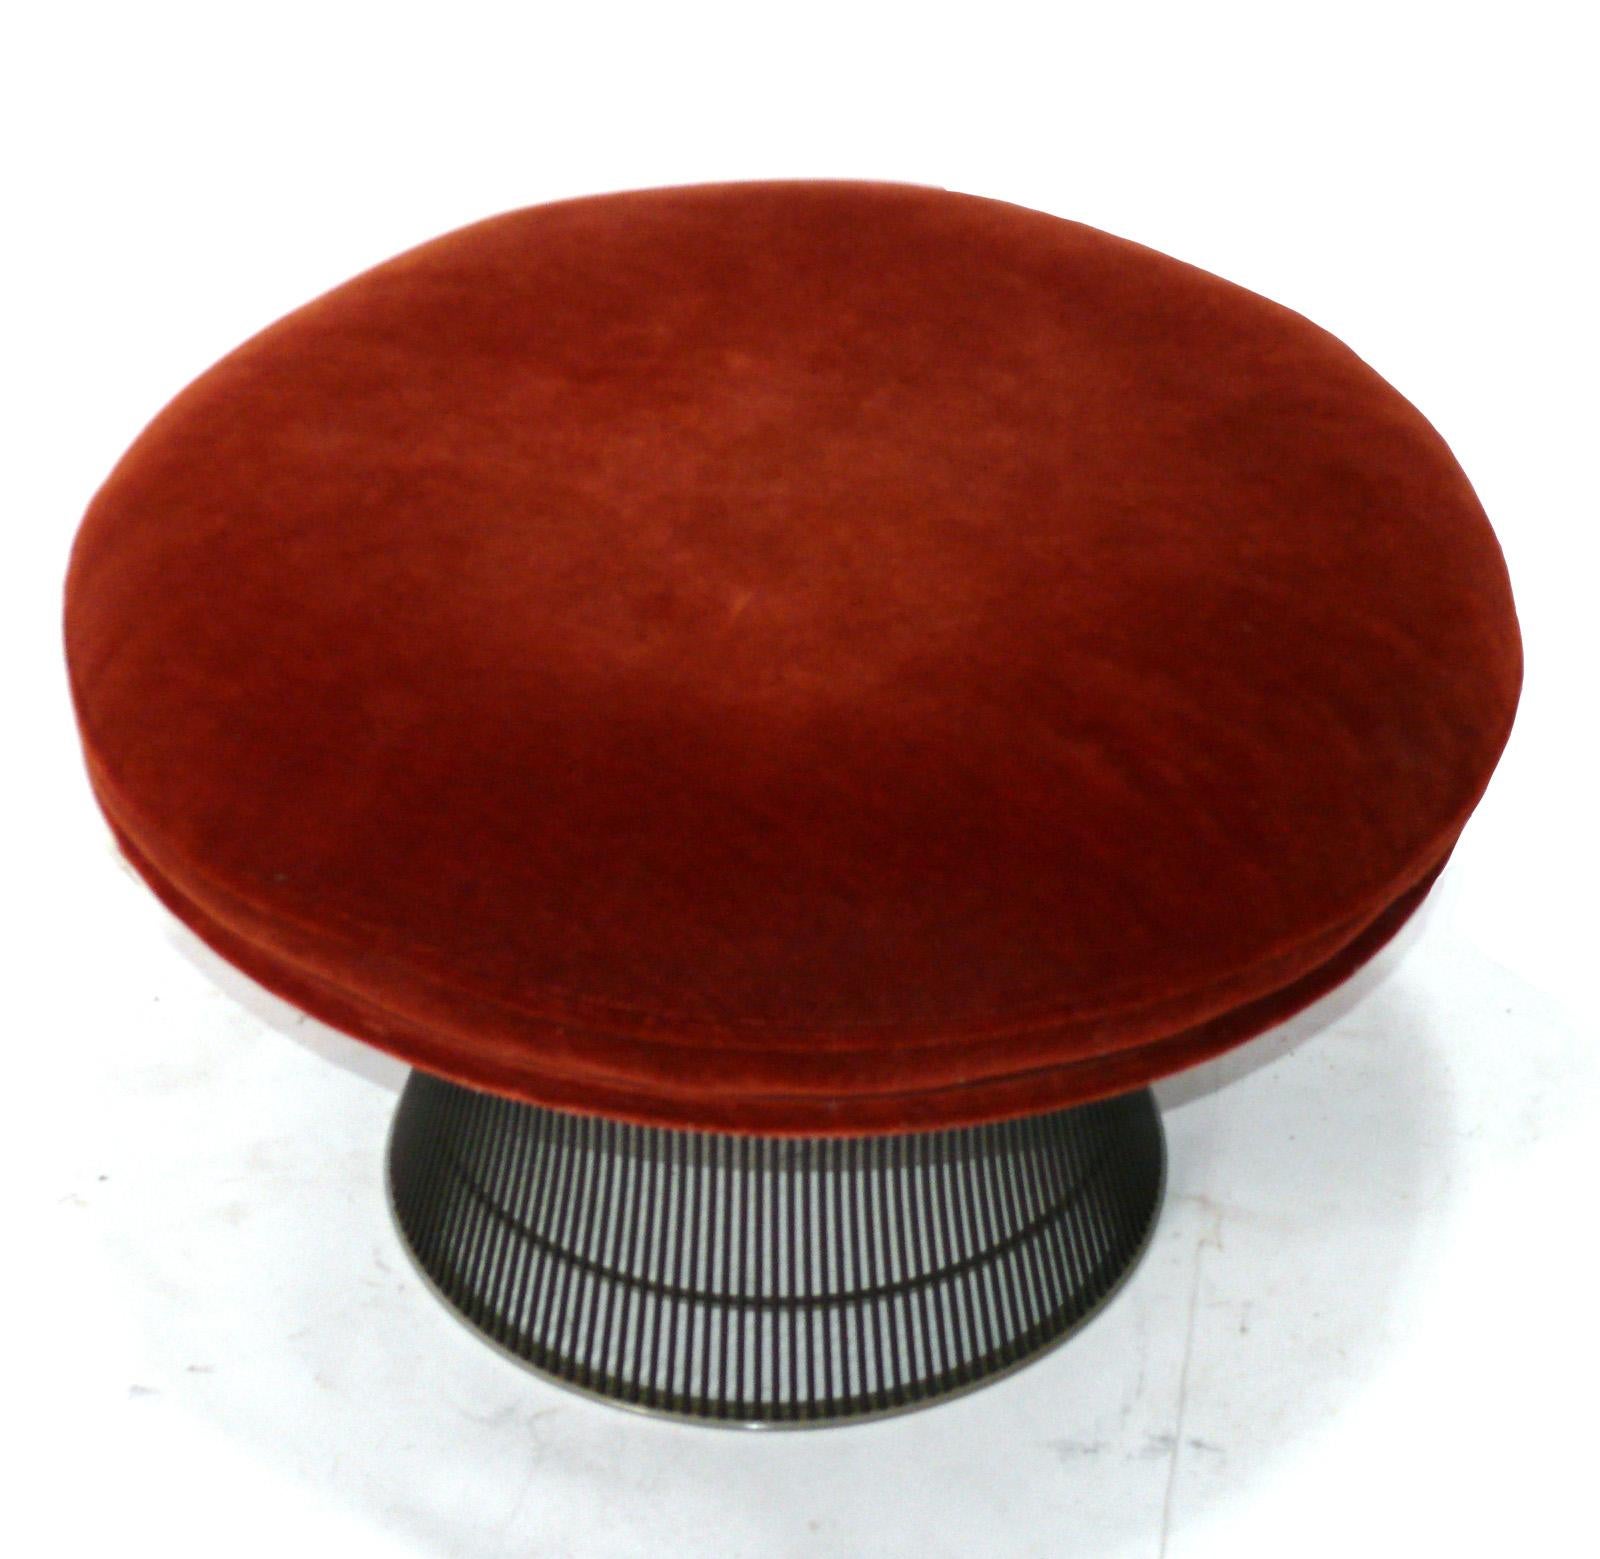 Sculptural stool or ottoman in bronze finish, designed by Warren Platner for Knoll, American, circa 1960s. Signed with Knoll tag. This stool is currently being reupholstered and can be completed in your fabric. Simply send us 3 yards of your fabric